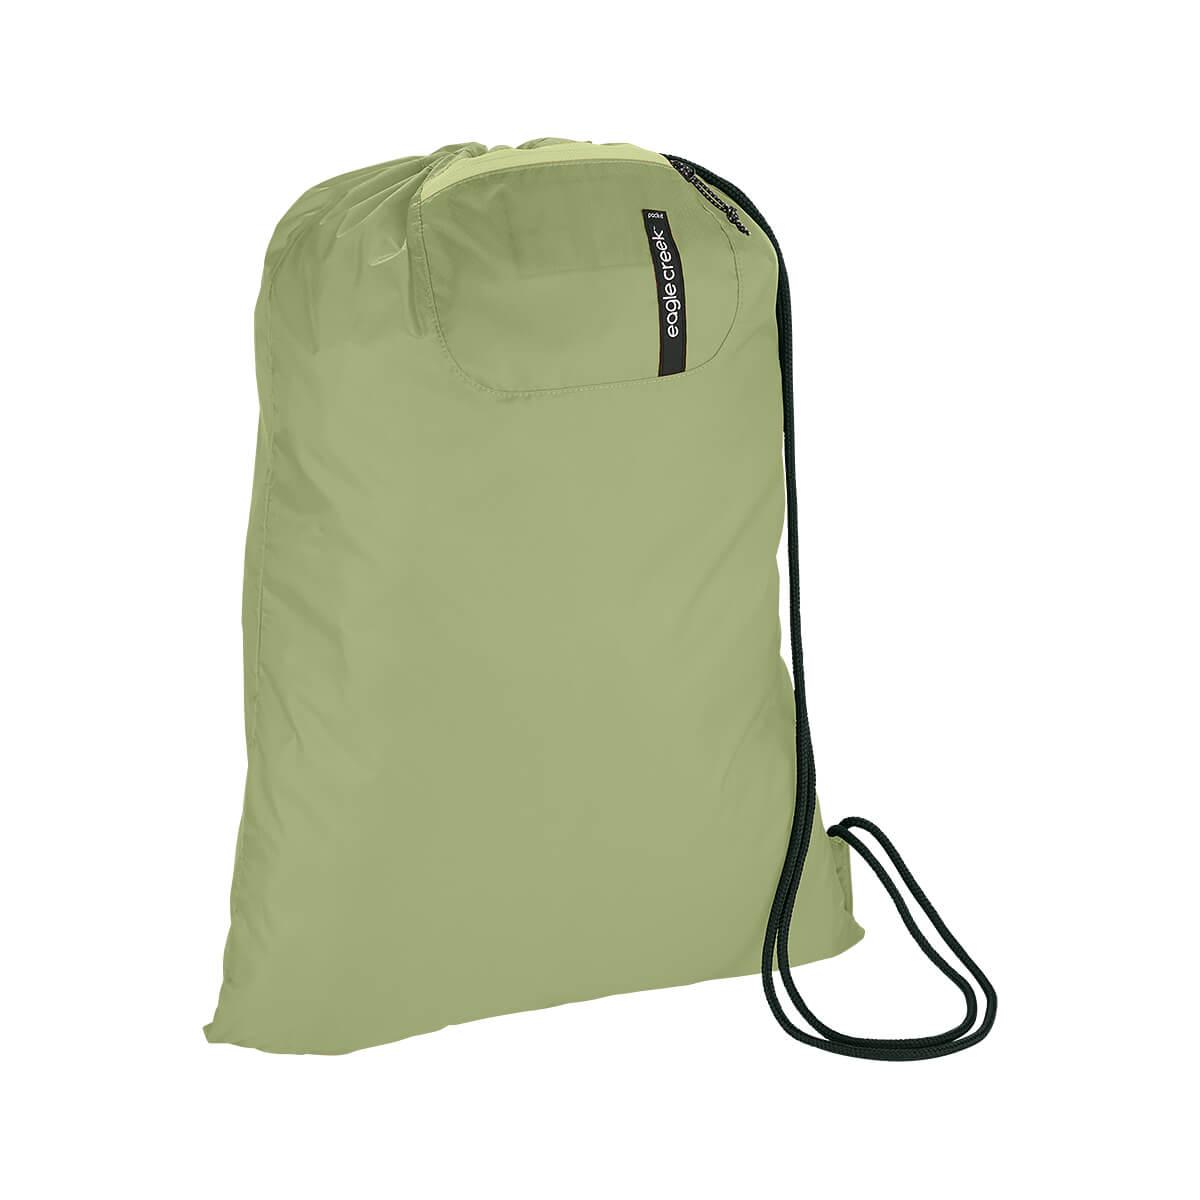  Pack- It Isolate Laundry Sac